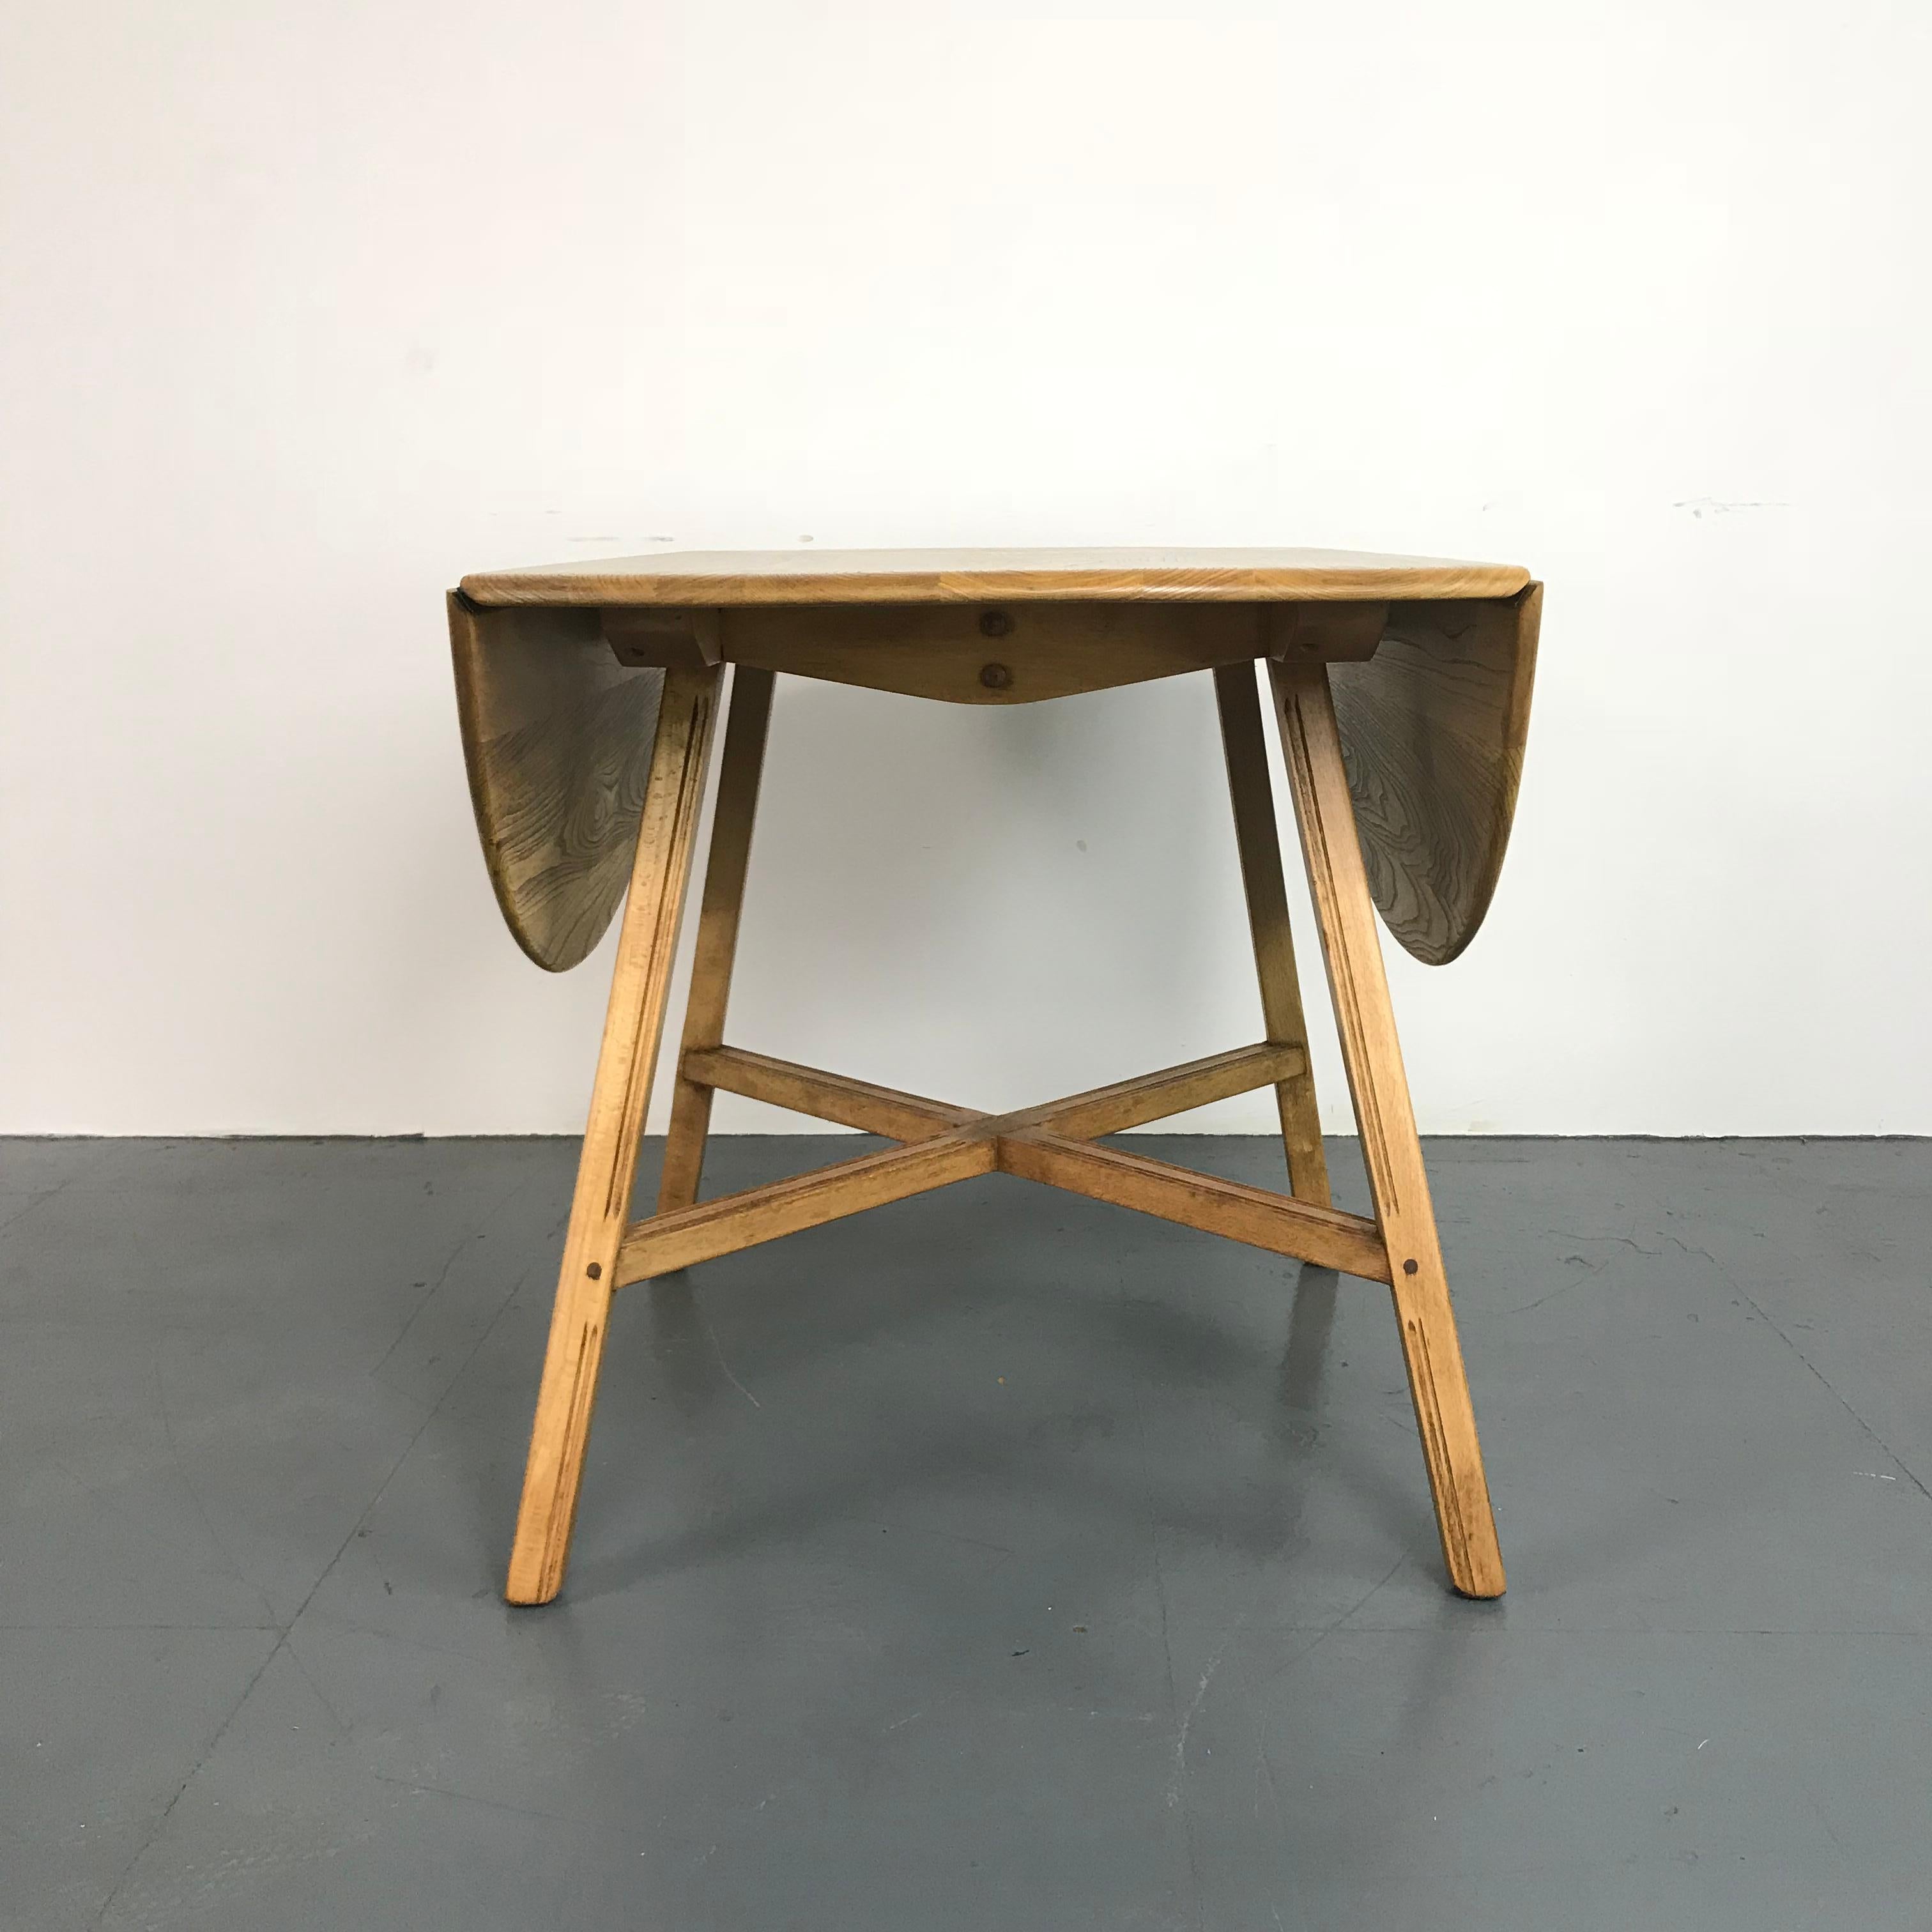 Lovely vintage (mid-1960s) Ercol round drop leaf dining table. Lovely elm top on beech legs. Beautiful patina to the wood. 

This has been fully restored so is in very good vintage condition. It's a vintage item, so has some general age-related